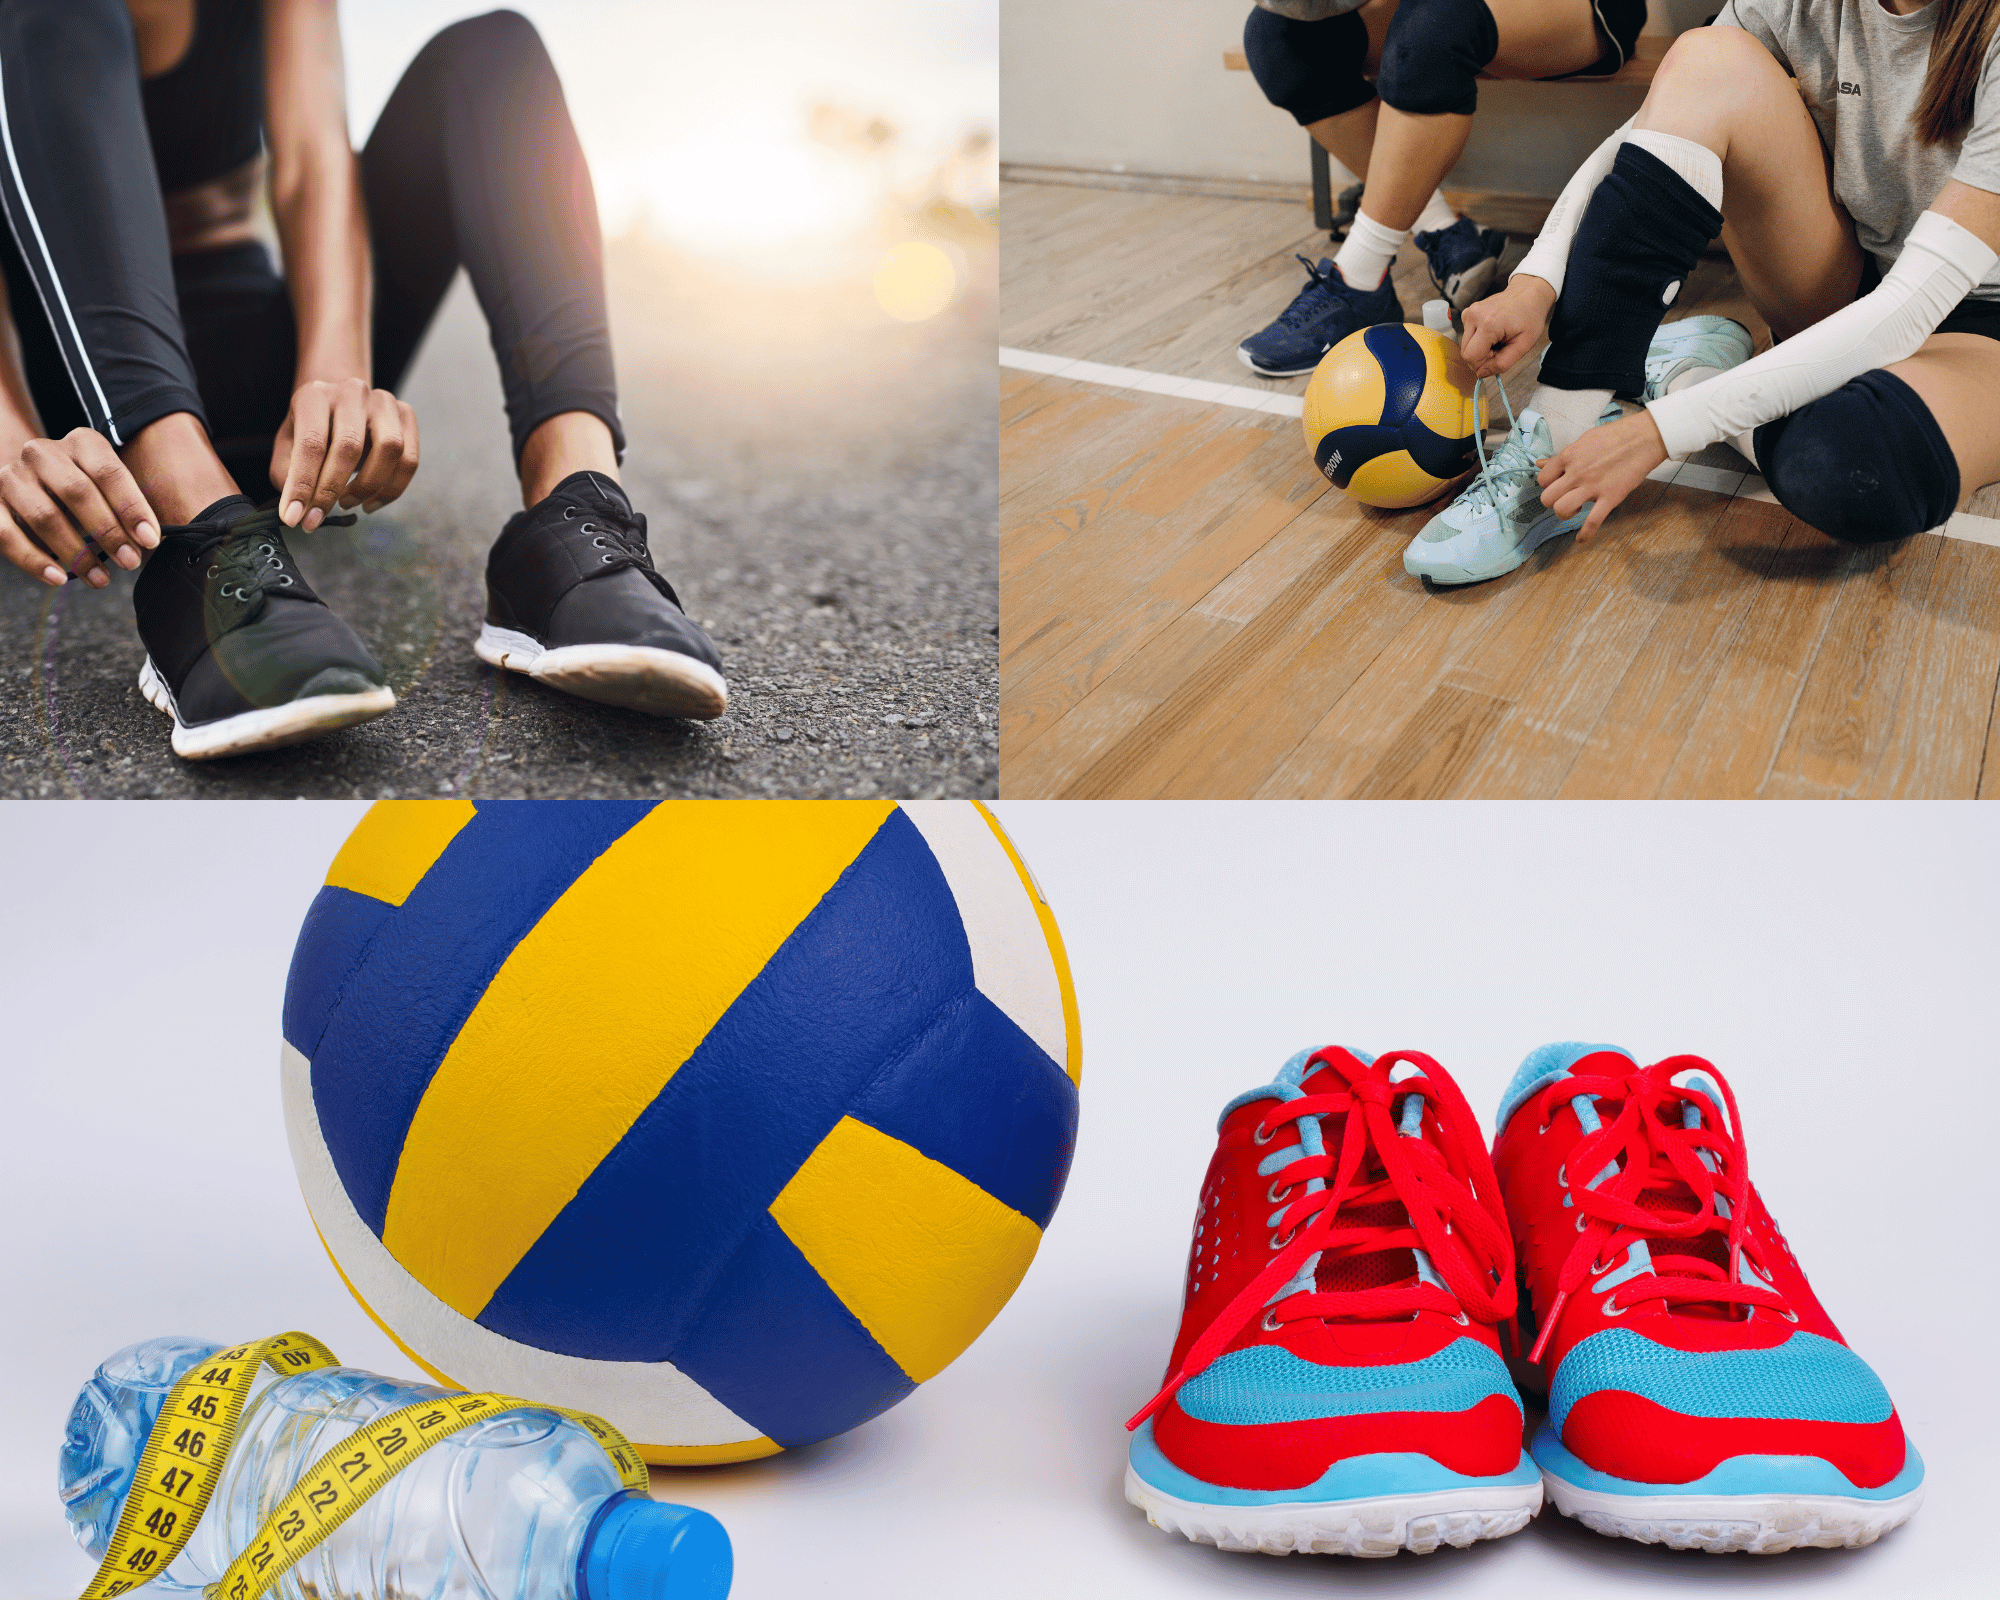 Best Performance Features Volleyball Shoes for Women